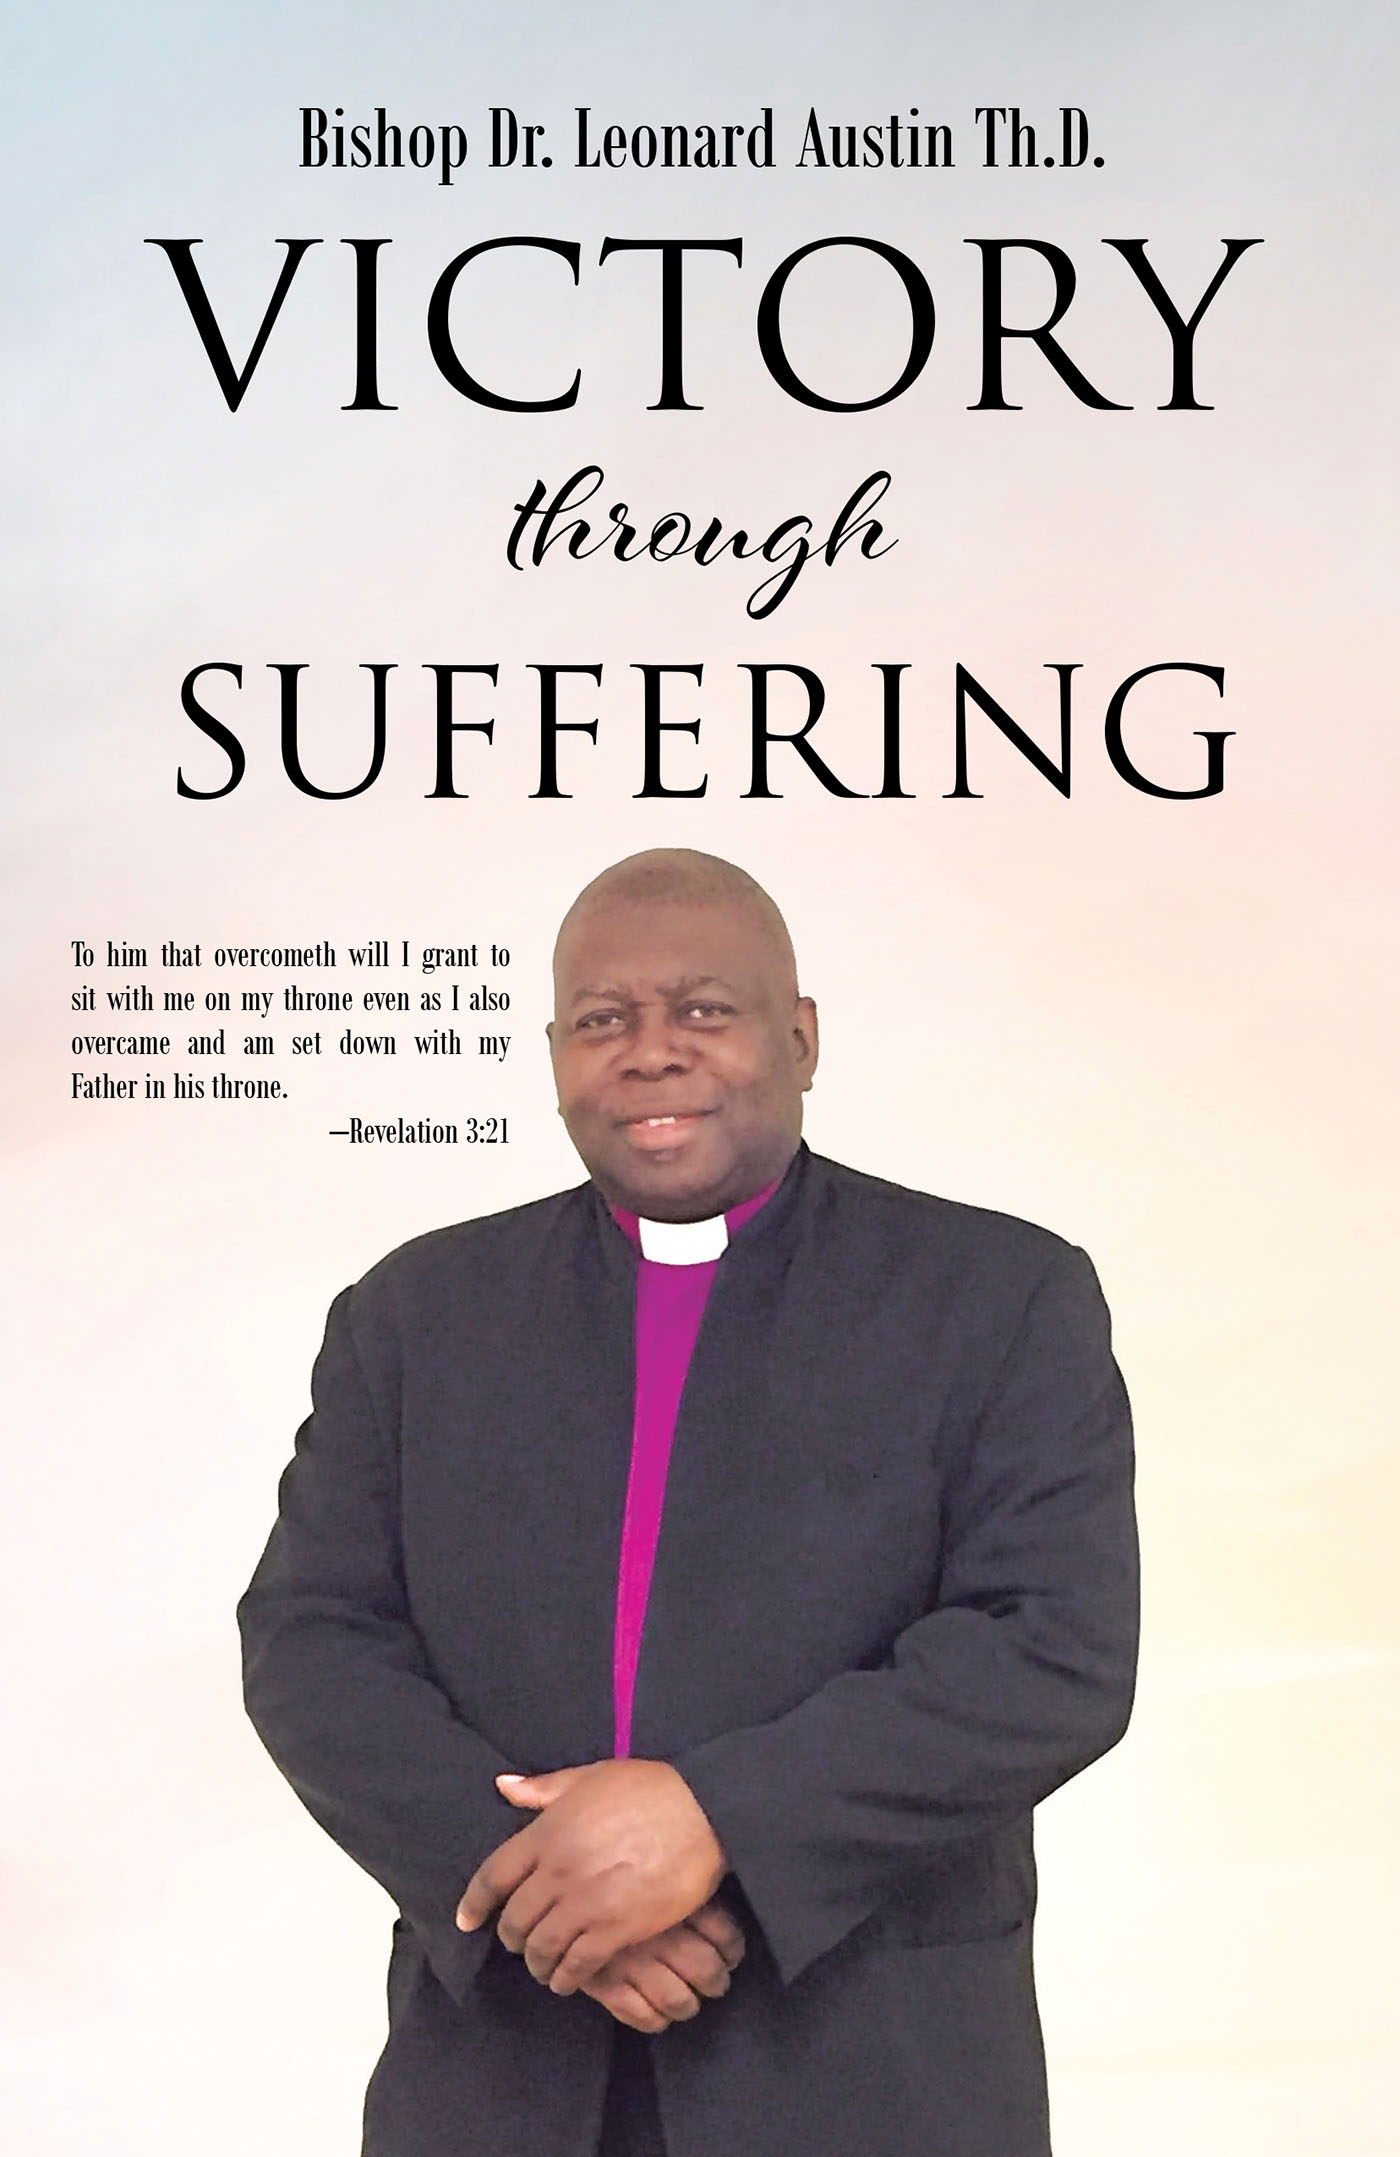 Bishop Dr. Leonard Austin Th.D.’s Newly Released “Victory through Suffering” is a Heartfelt Message of the Importance of the Blessings in the Lessons